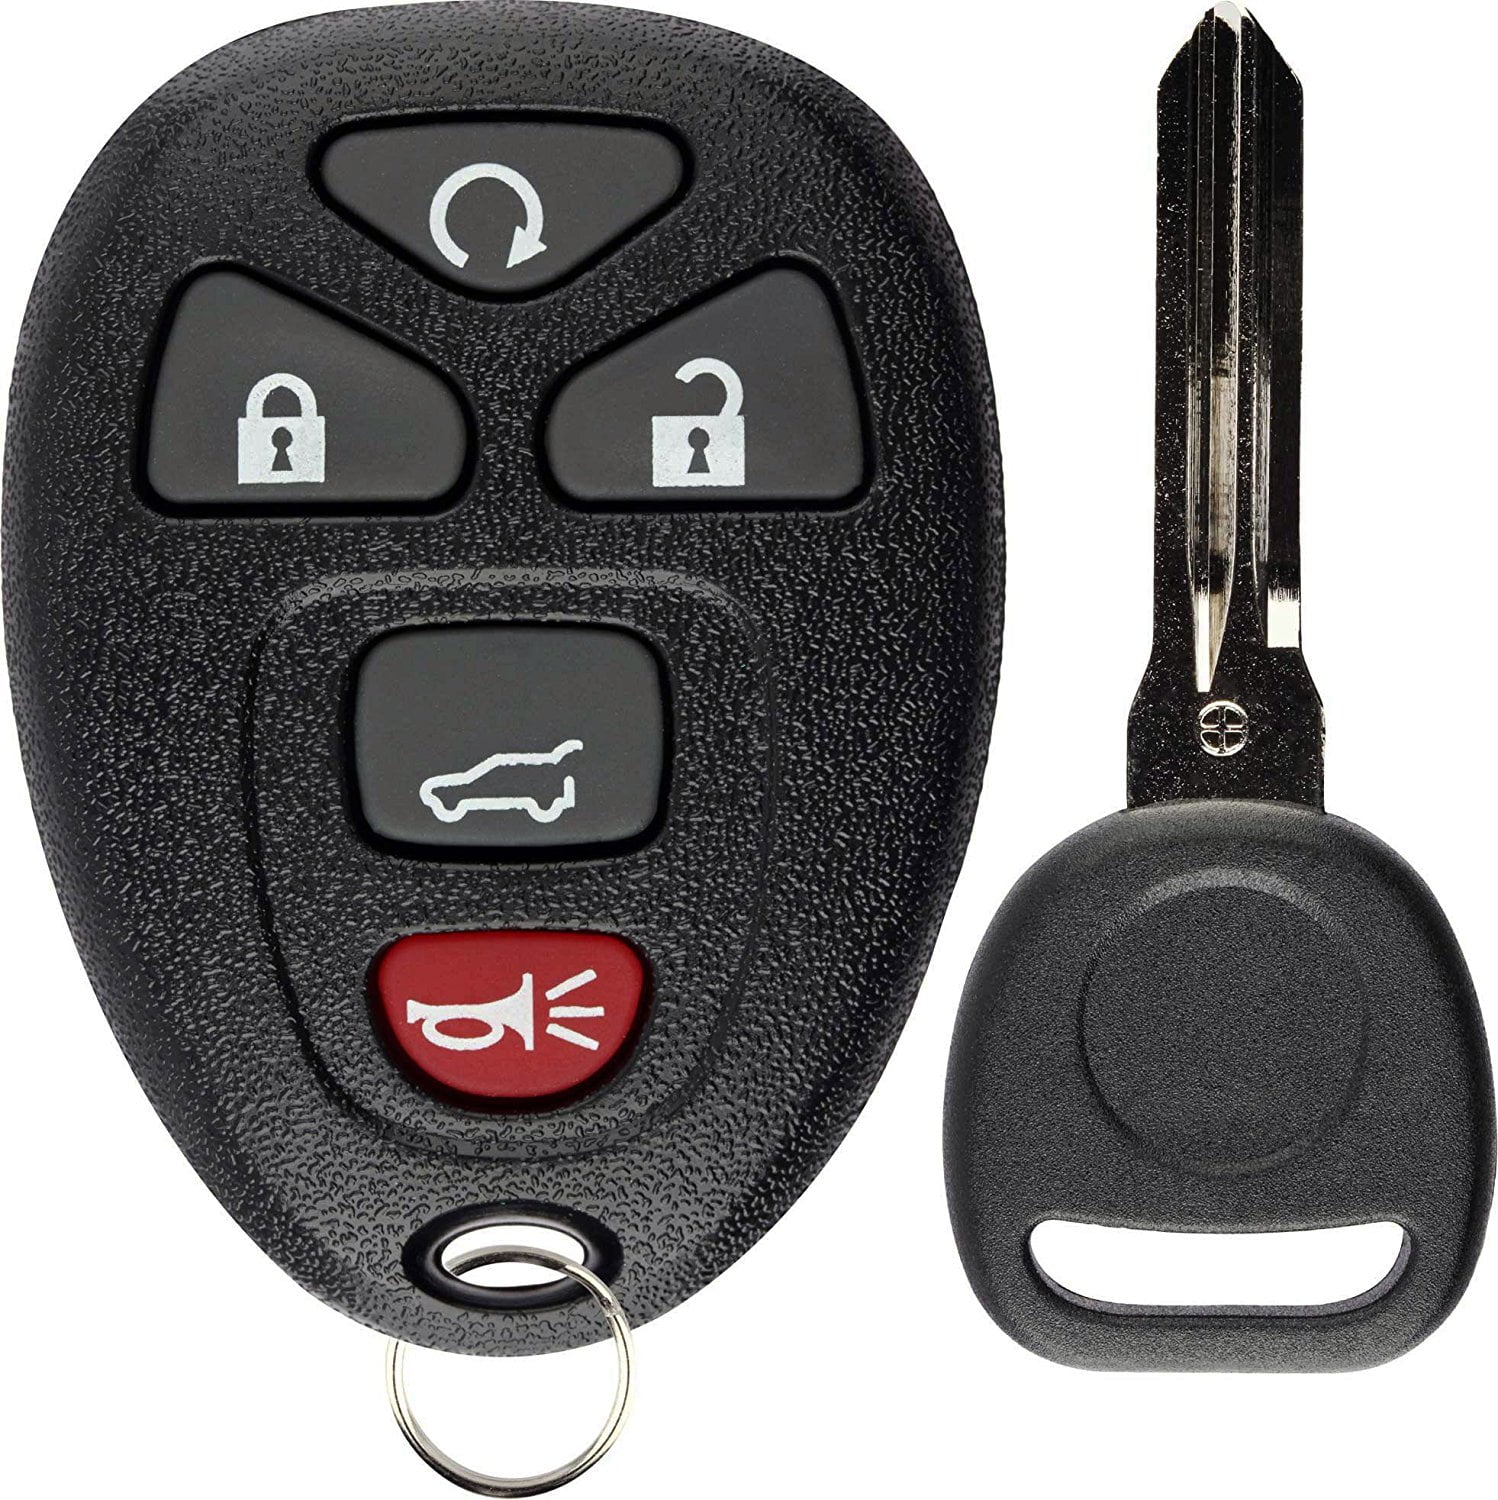 Details about   keyless remote entry OEM Escalade factory key fob starter OUC6000066 #2 clicker 